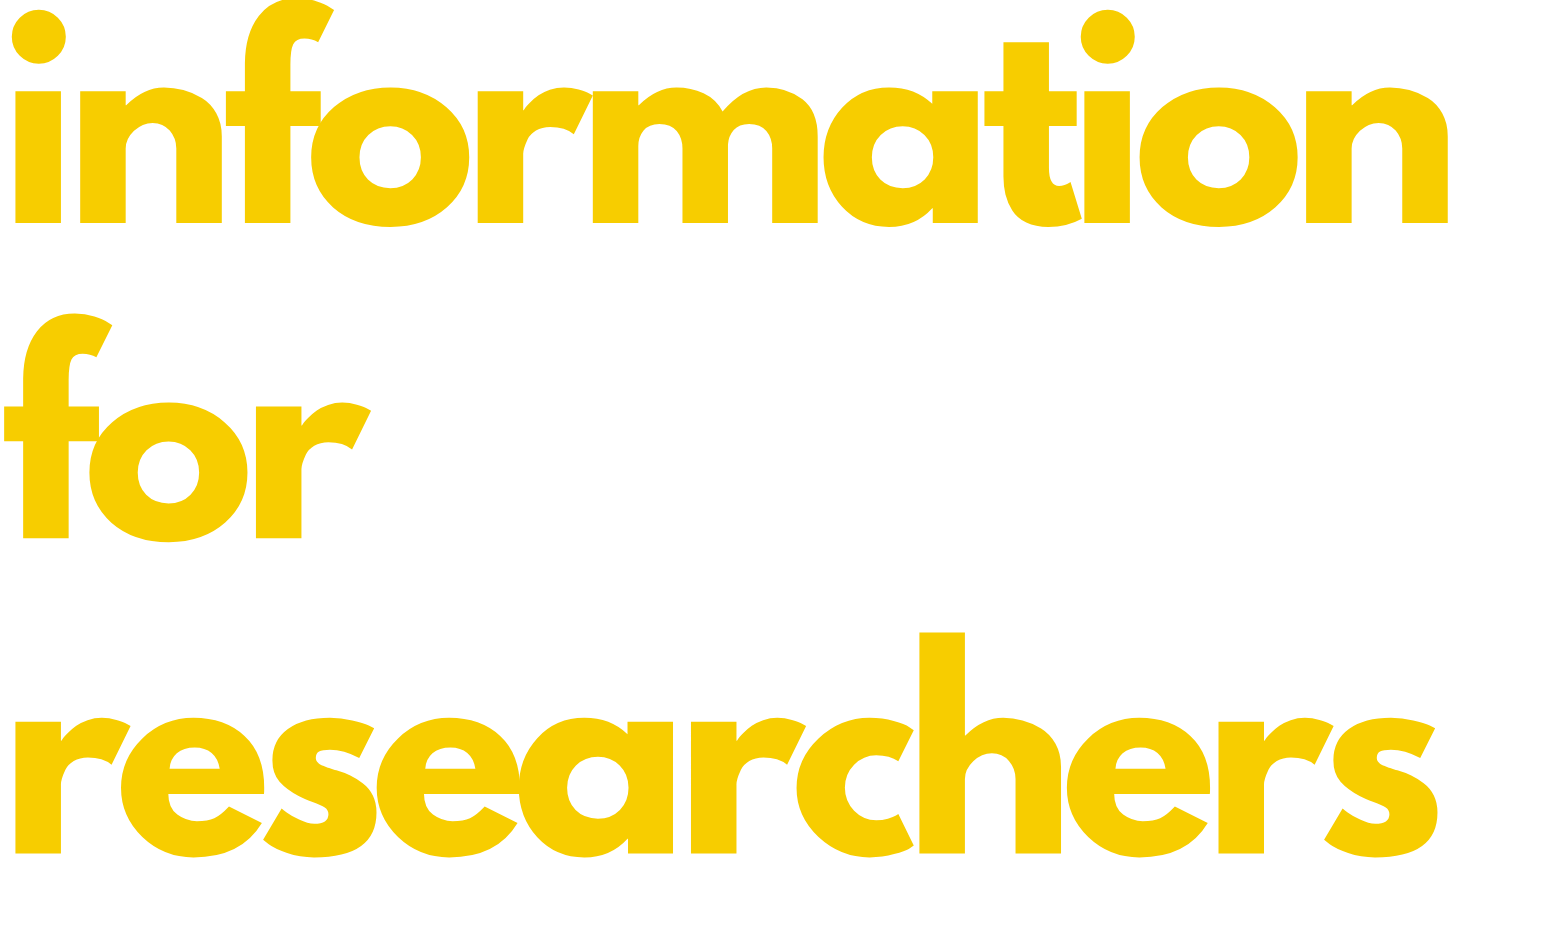 simple image with text that says Information for researchers